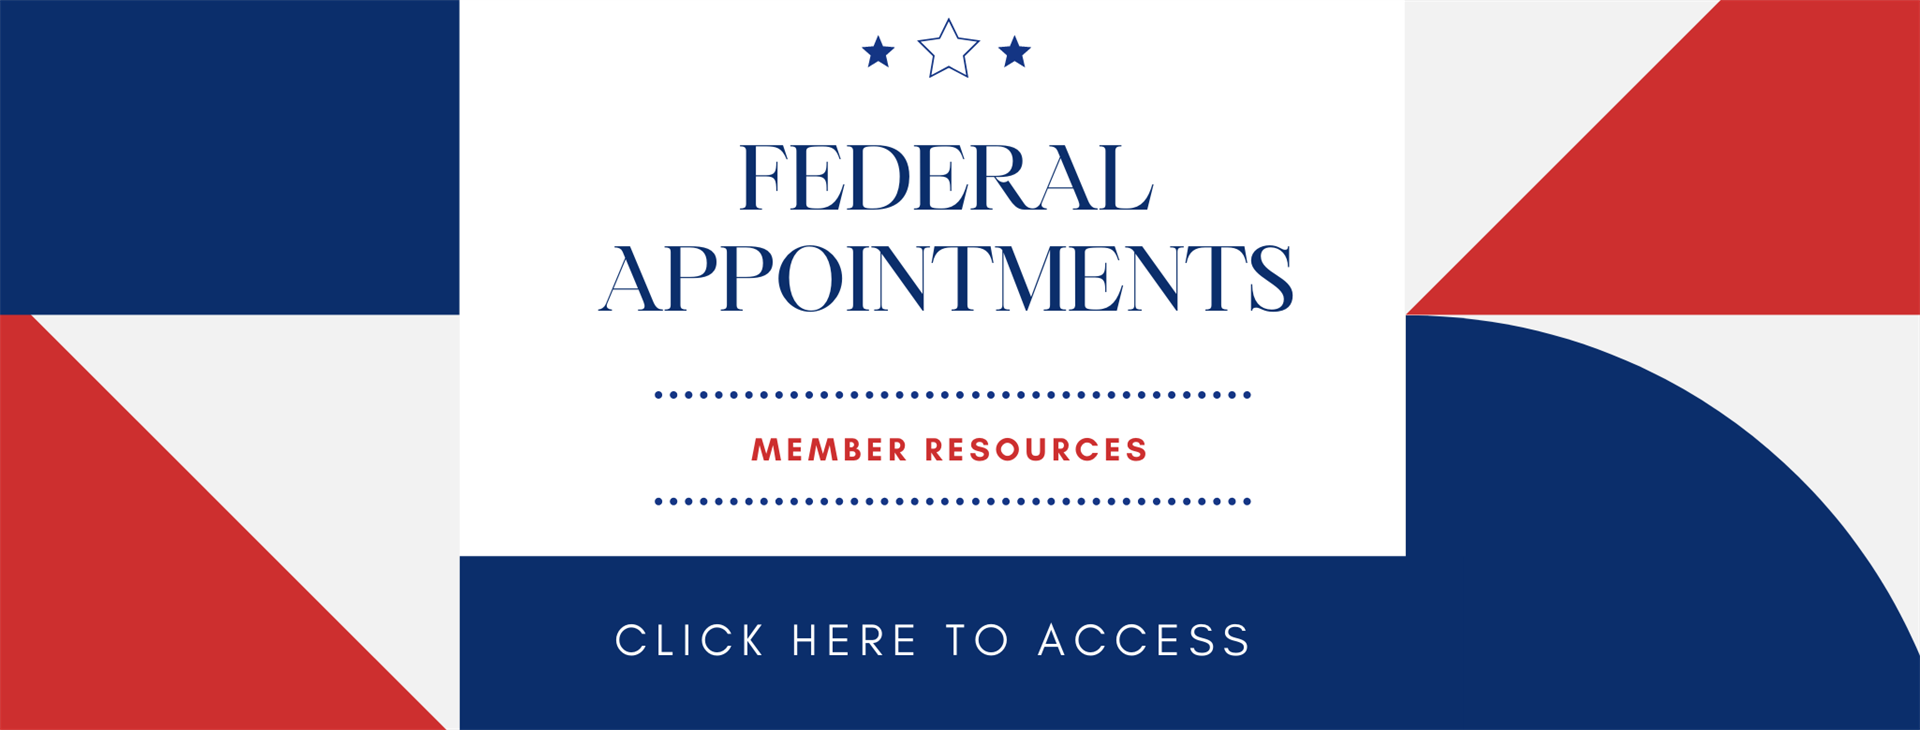 Link to member resources for Federal Appointments